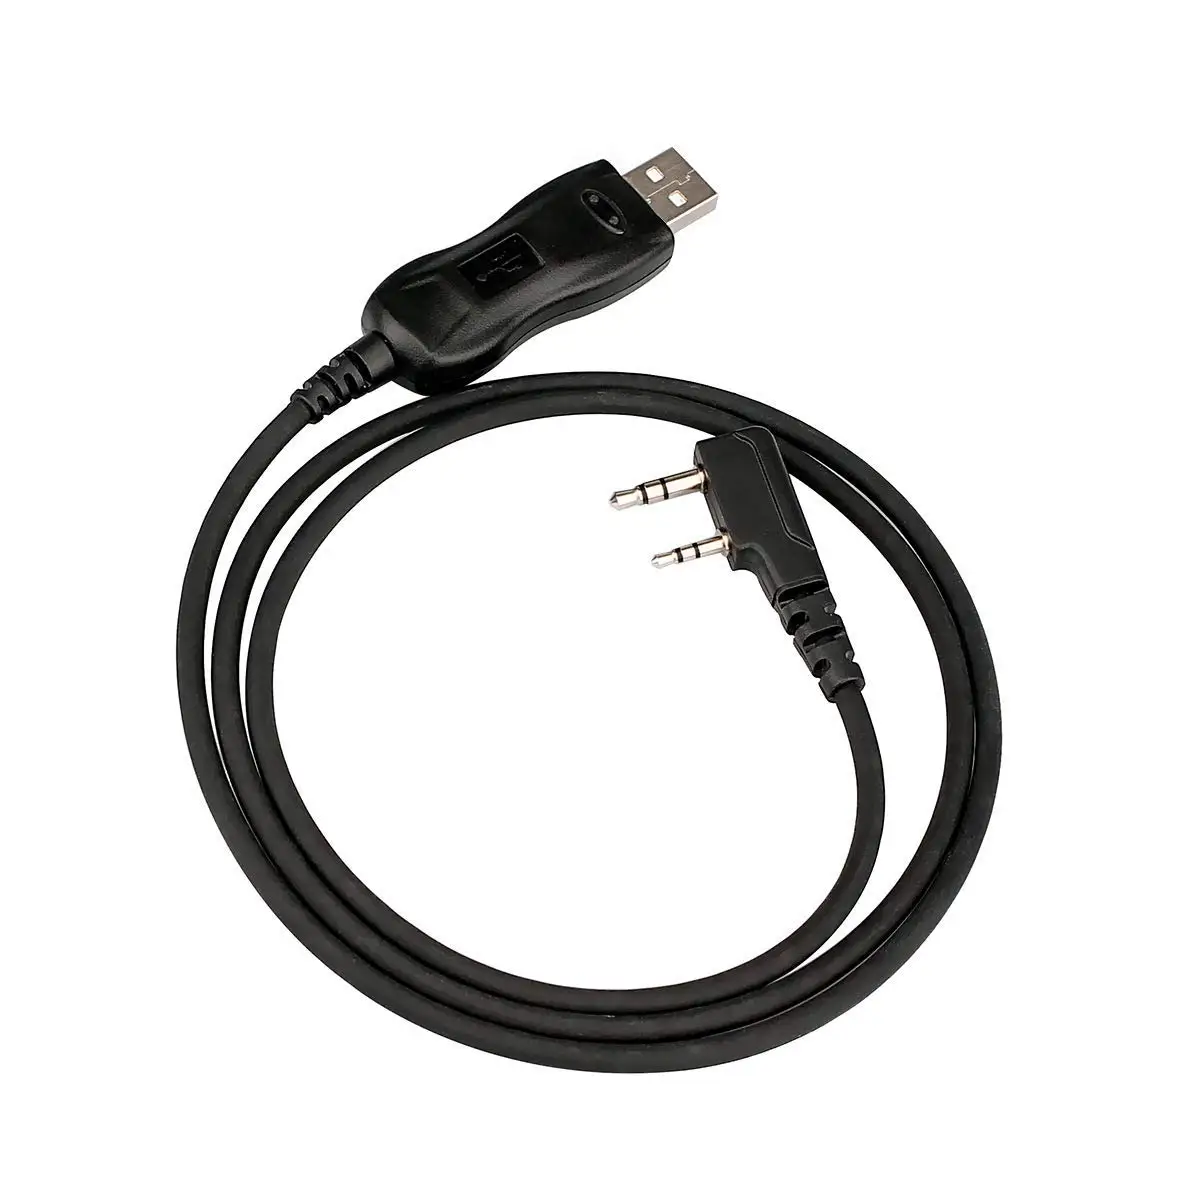 Buy PICAXE USB Programming Cable in Cheap Price on